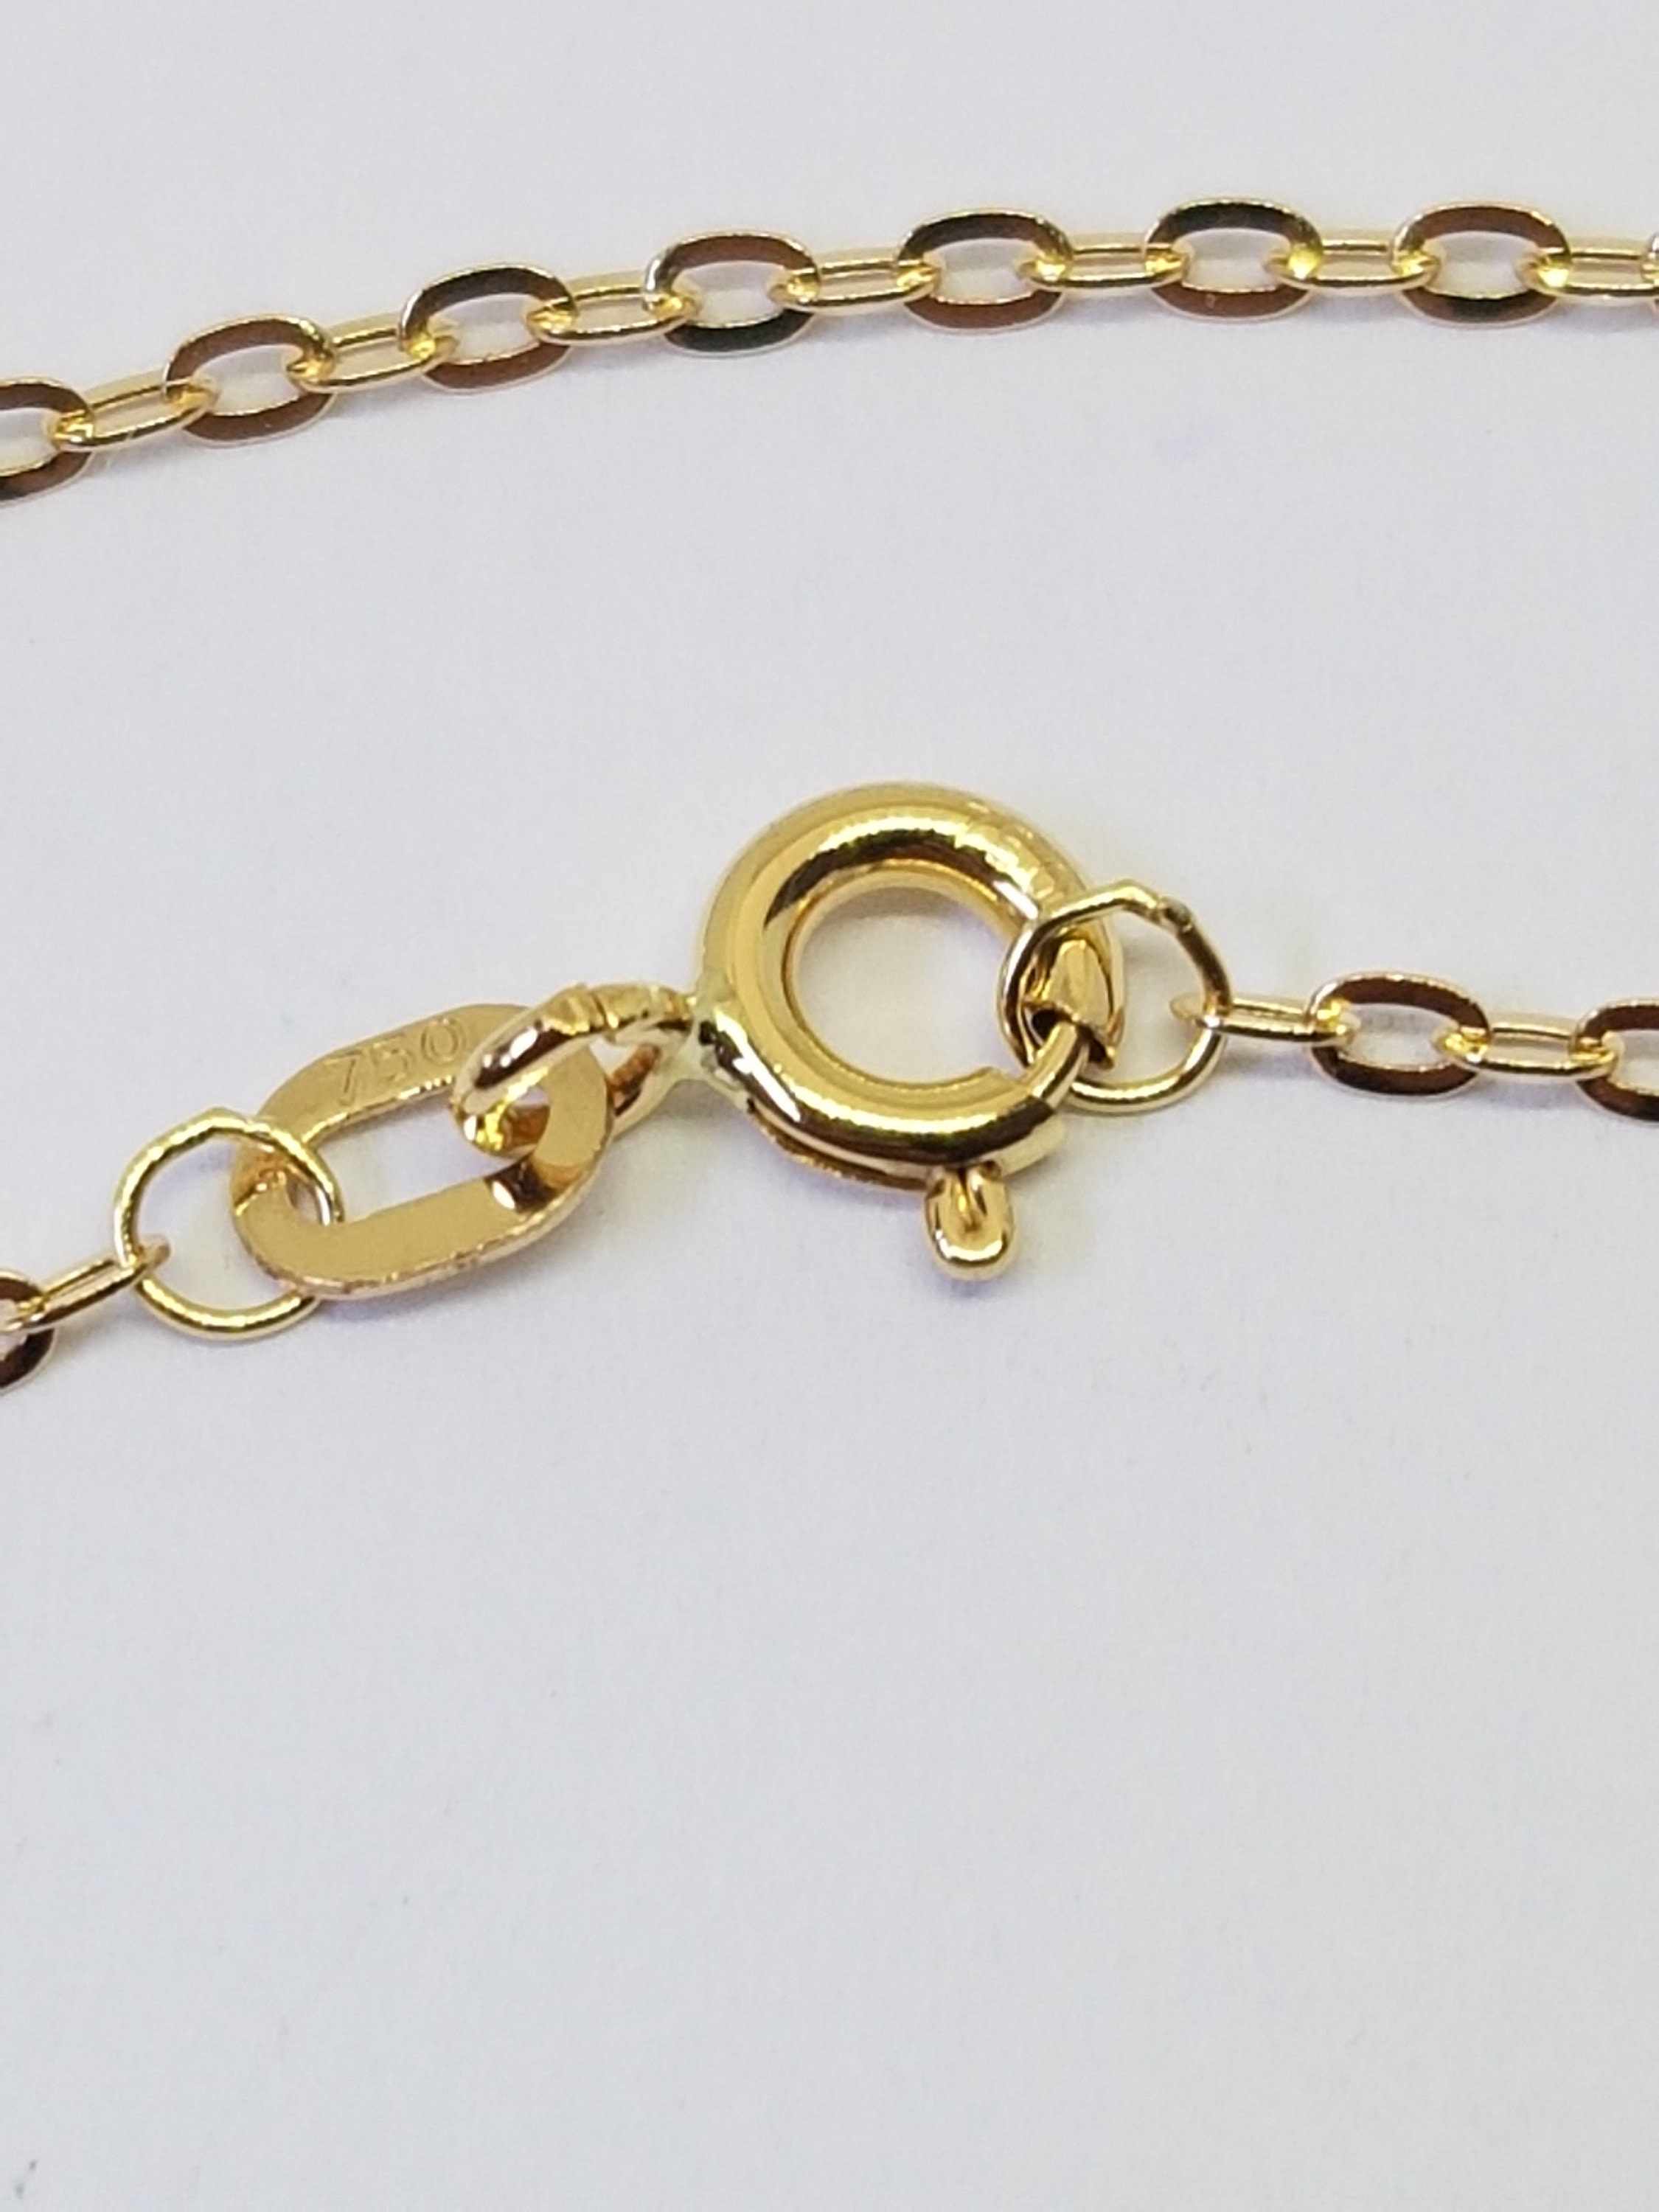 Chain Solid Yellow Gold 18k 750% 60 Cm 1.70 Mm - Etsy Sweden